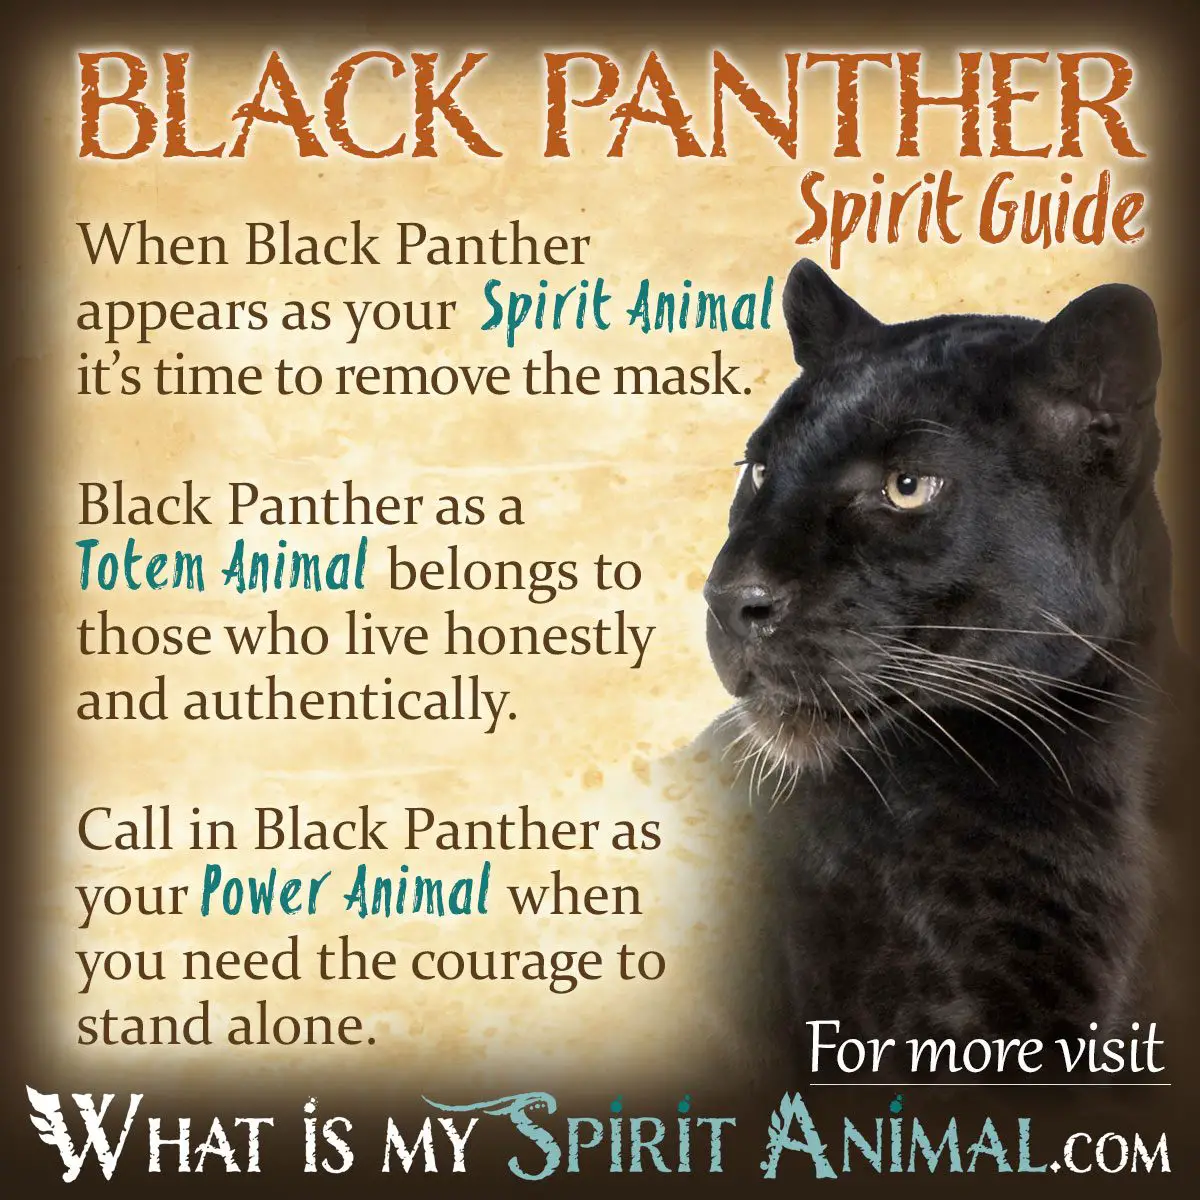 What Is A Black Panther?